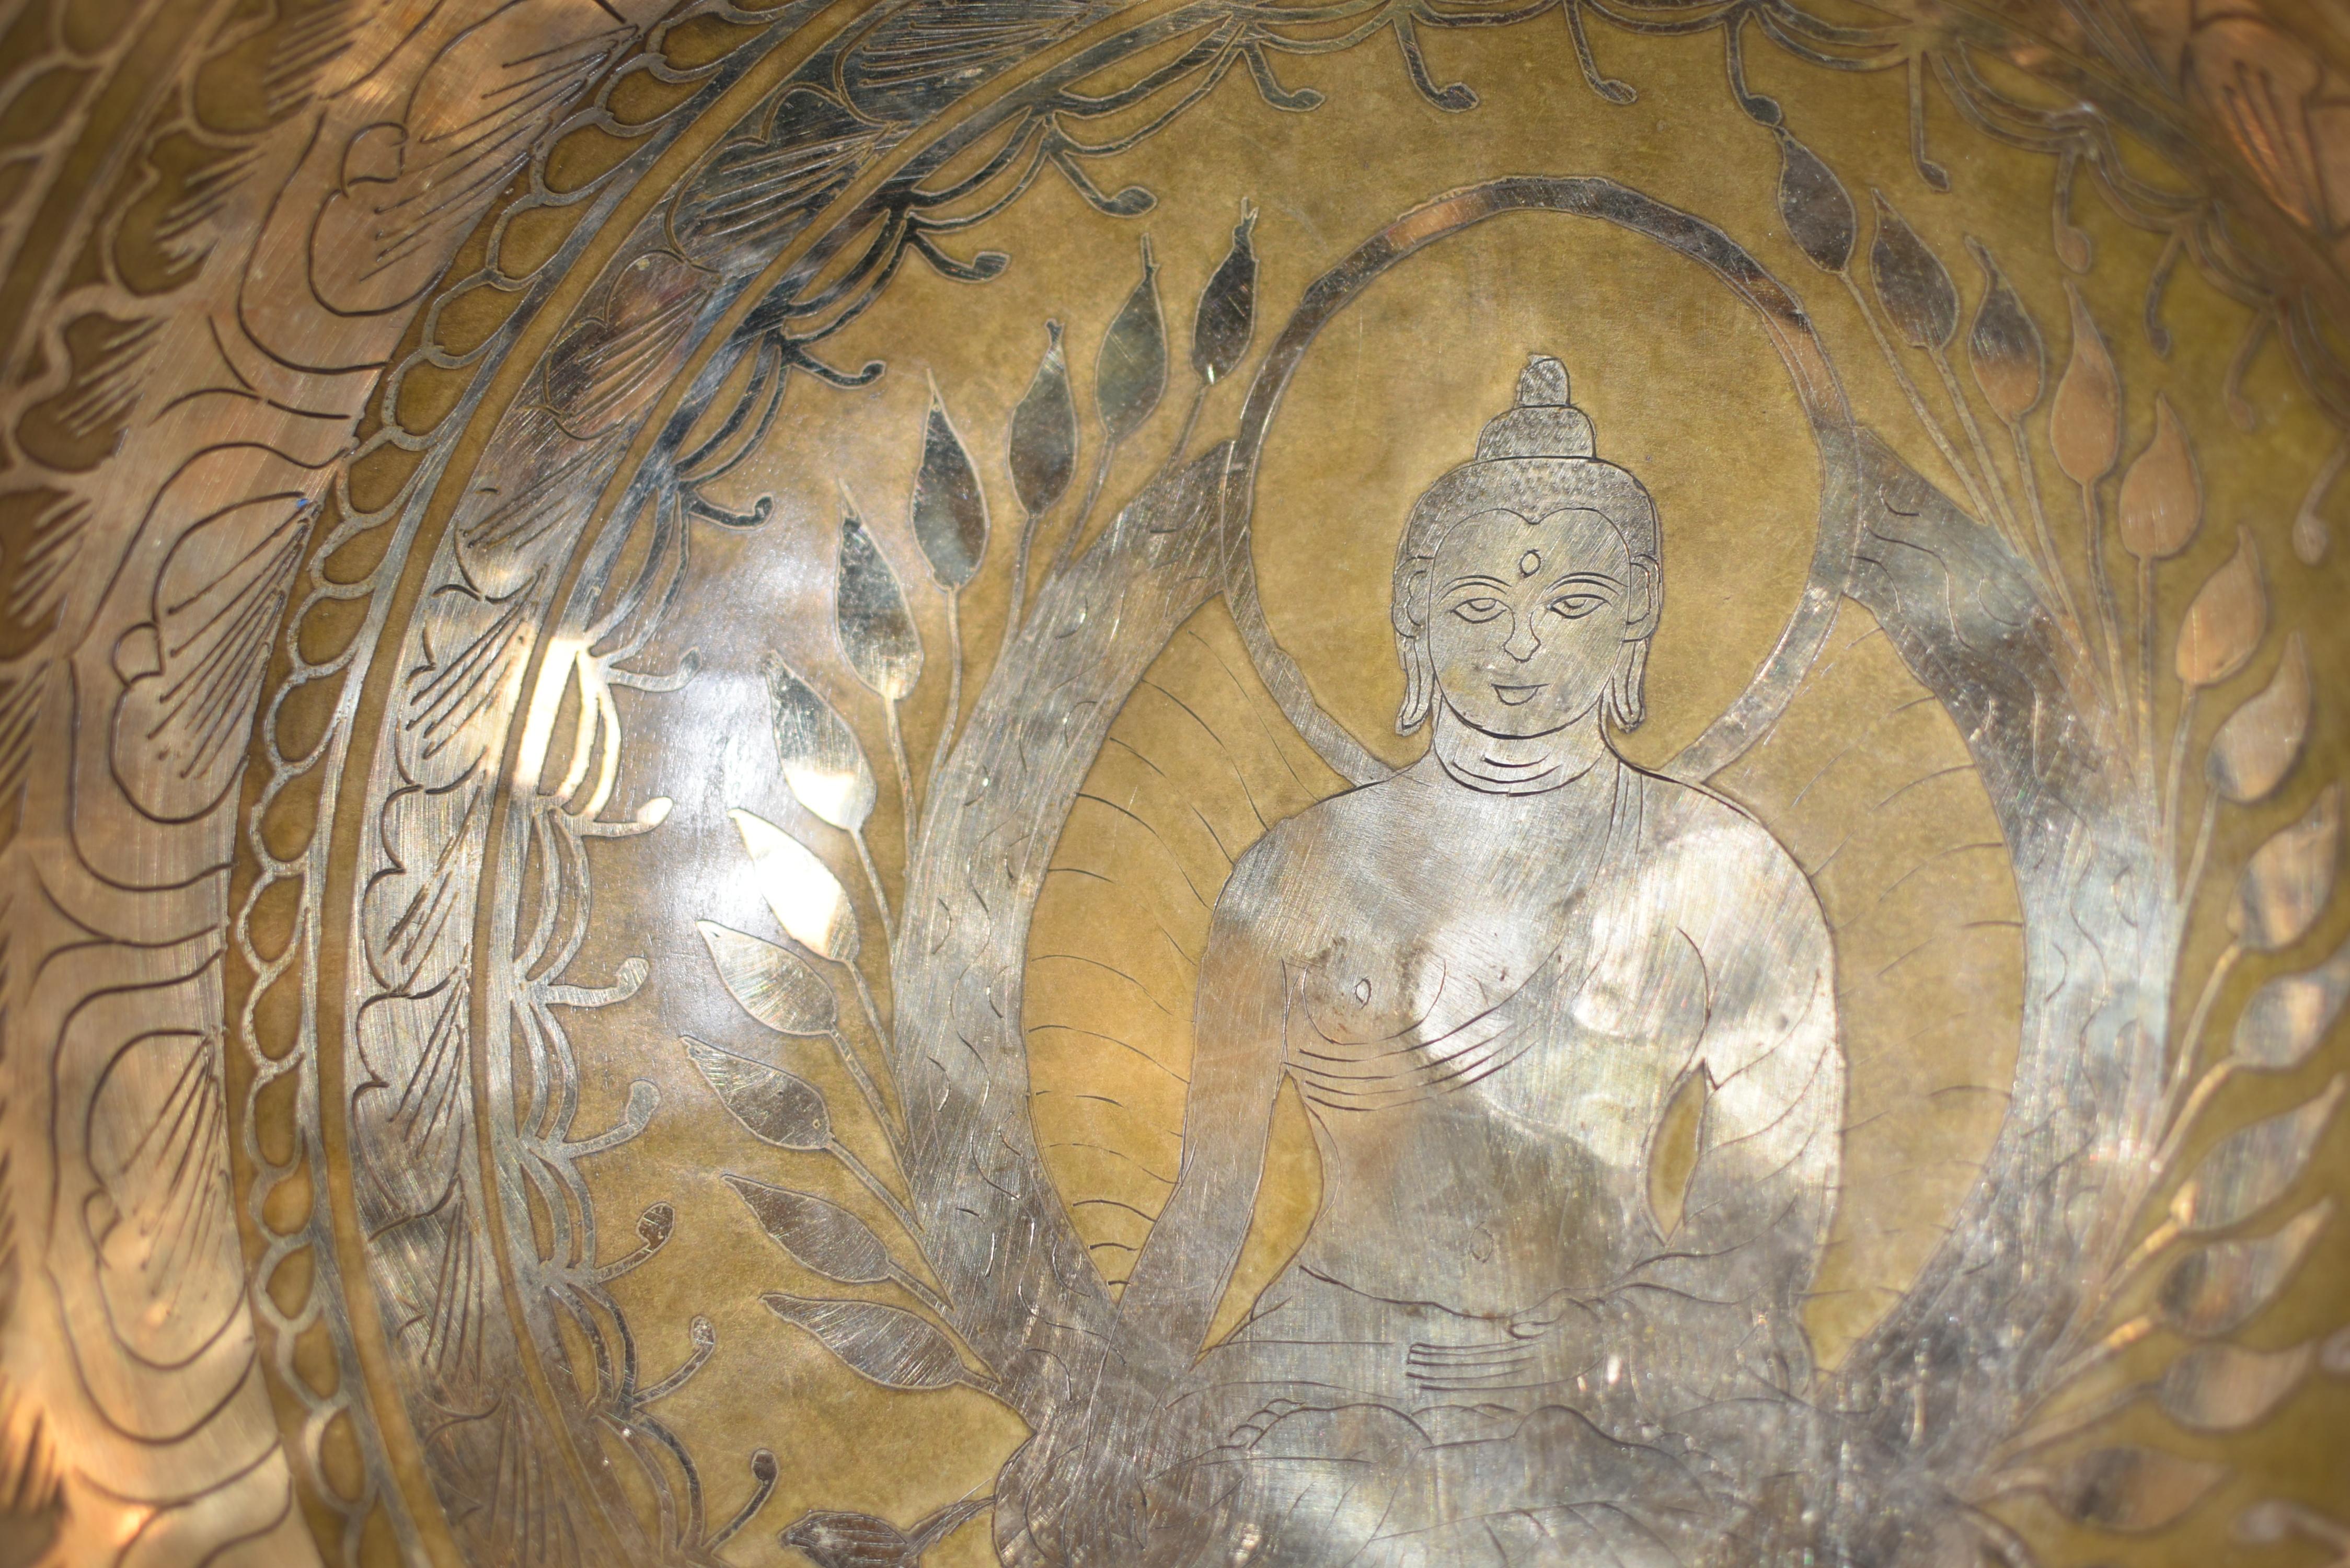 Hand-Crafted Huge Solid Bronze Singing Bowl with Buddha 13